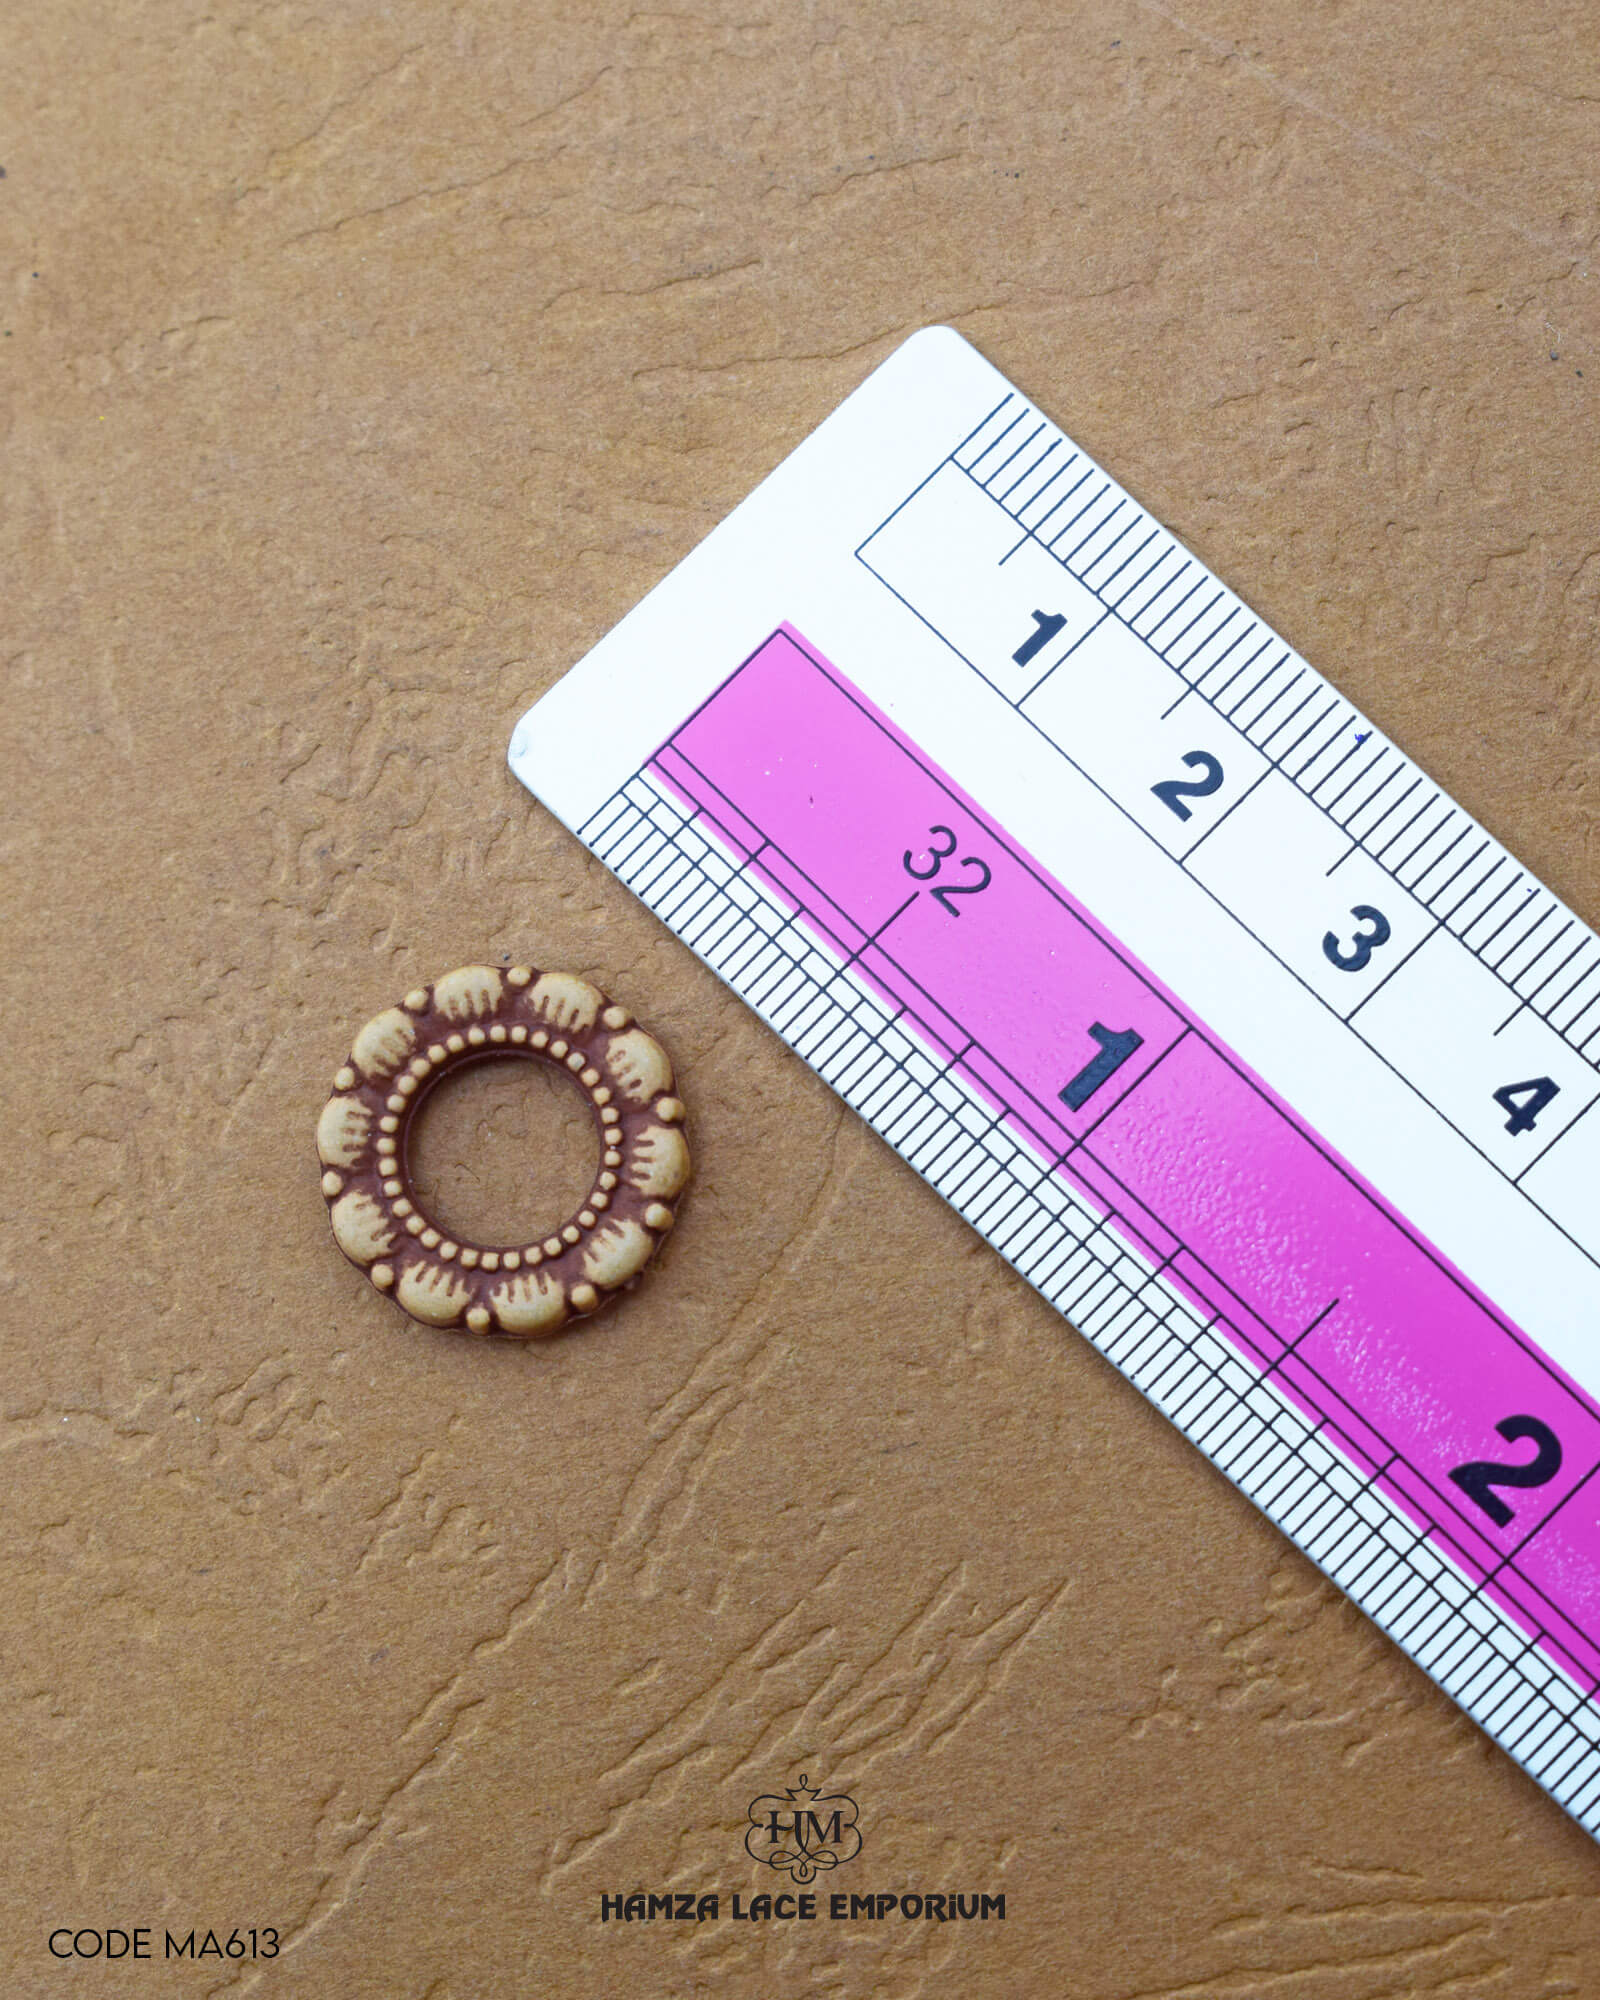 Size of the 'Ring Design Button MA613' is shown with a ruler